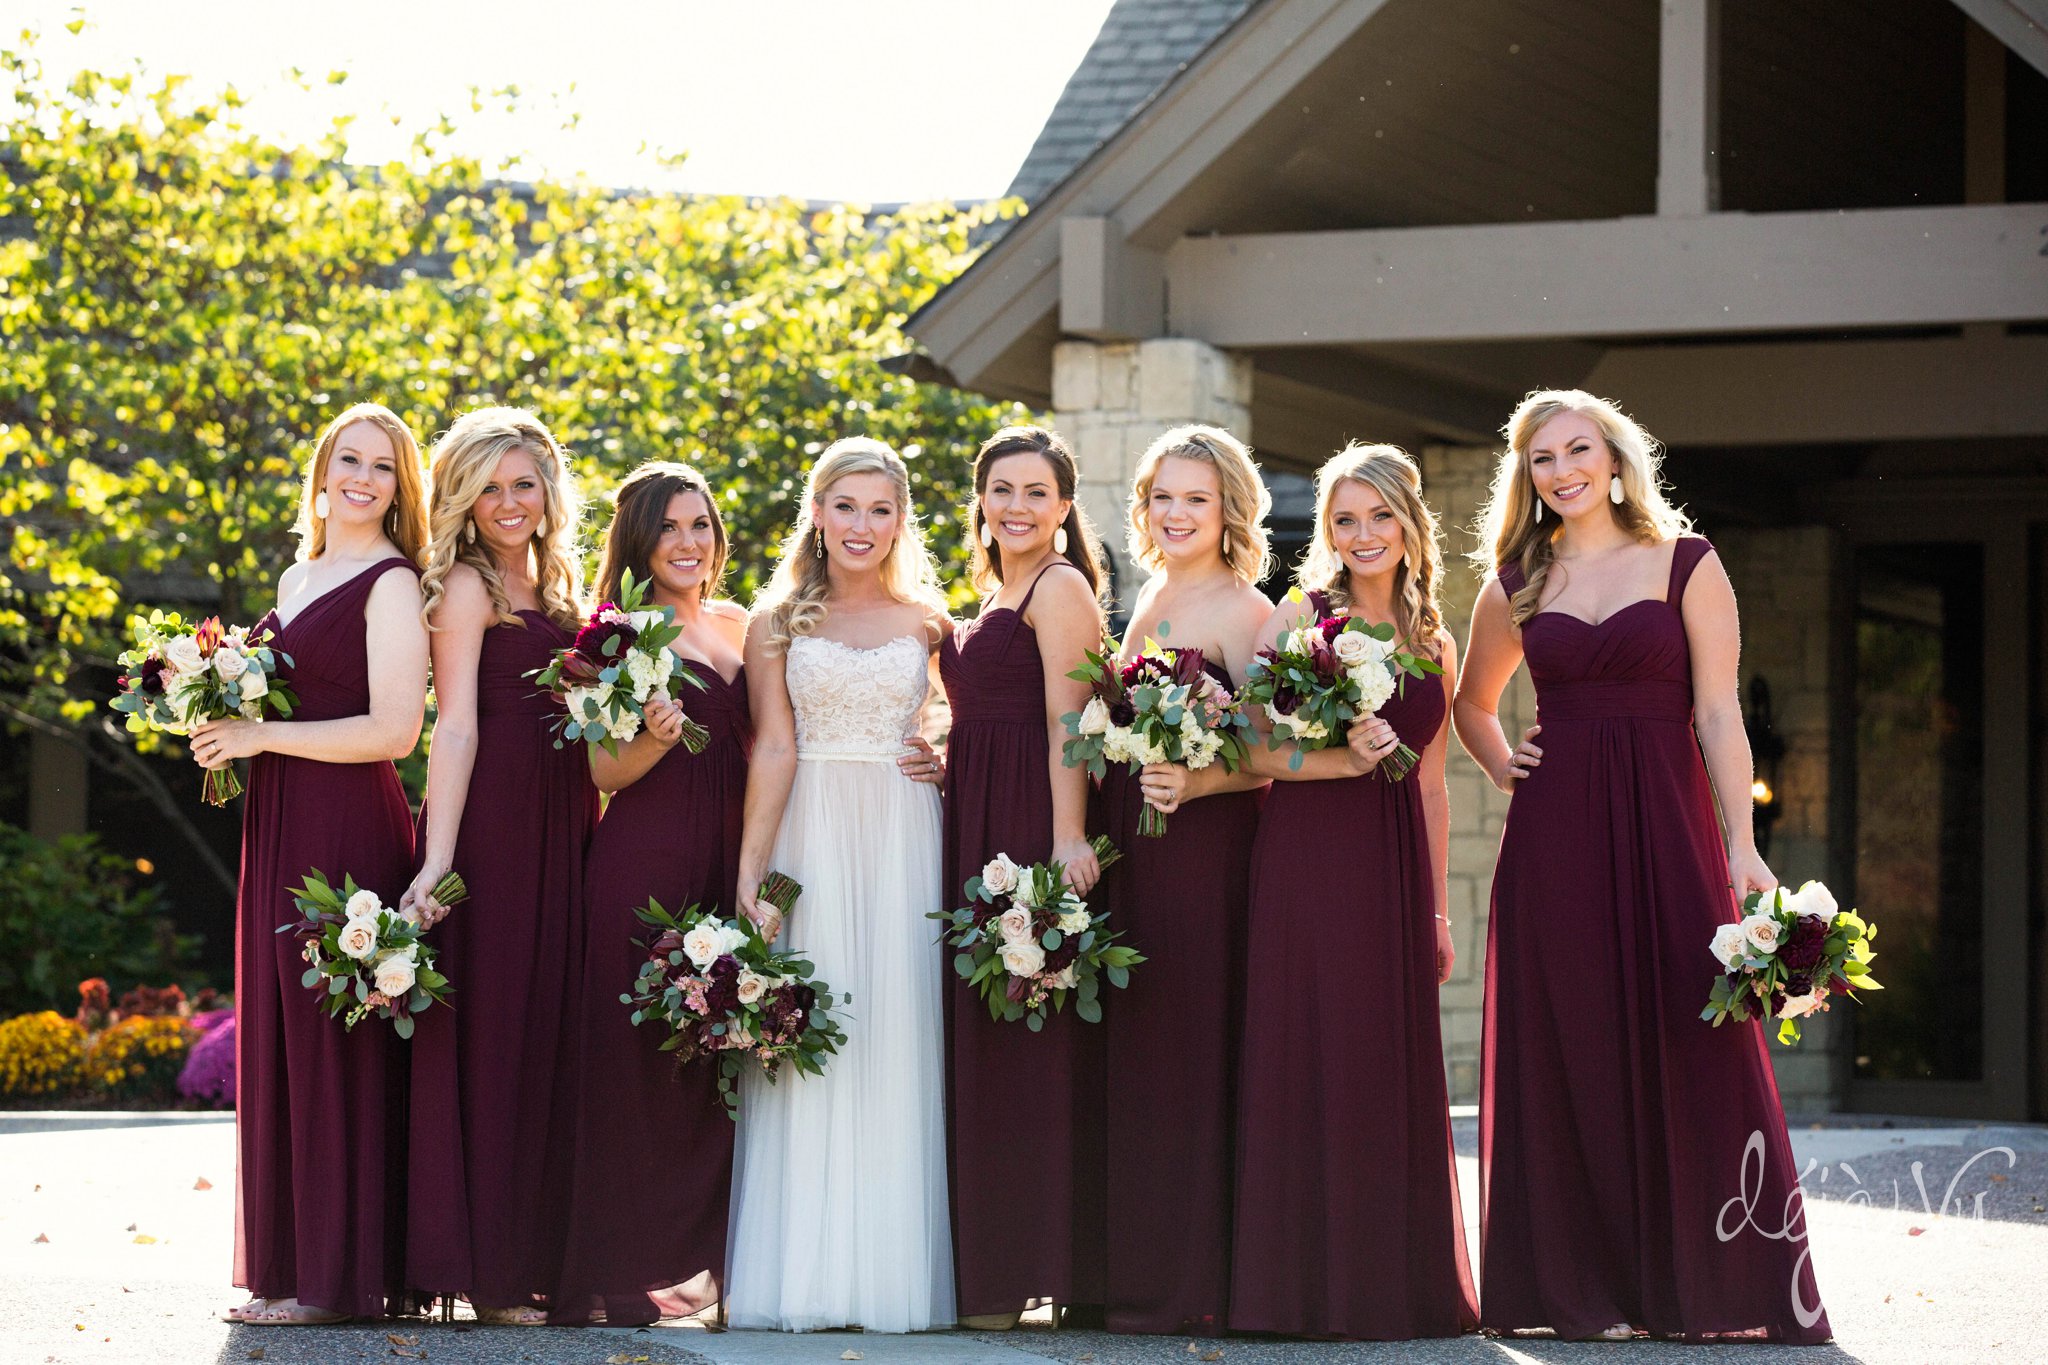 Shadow Glen Country Club Wedding | bridesmaids fashionable | Images by: www.feliciathephotographer.com